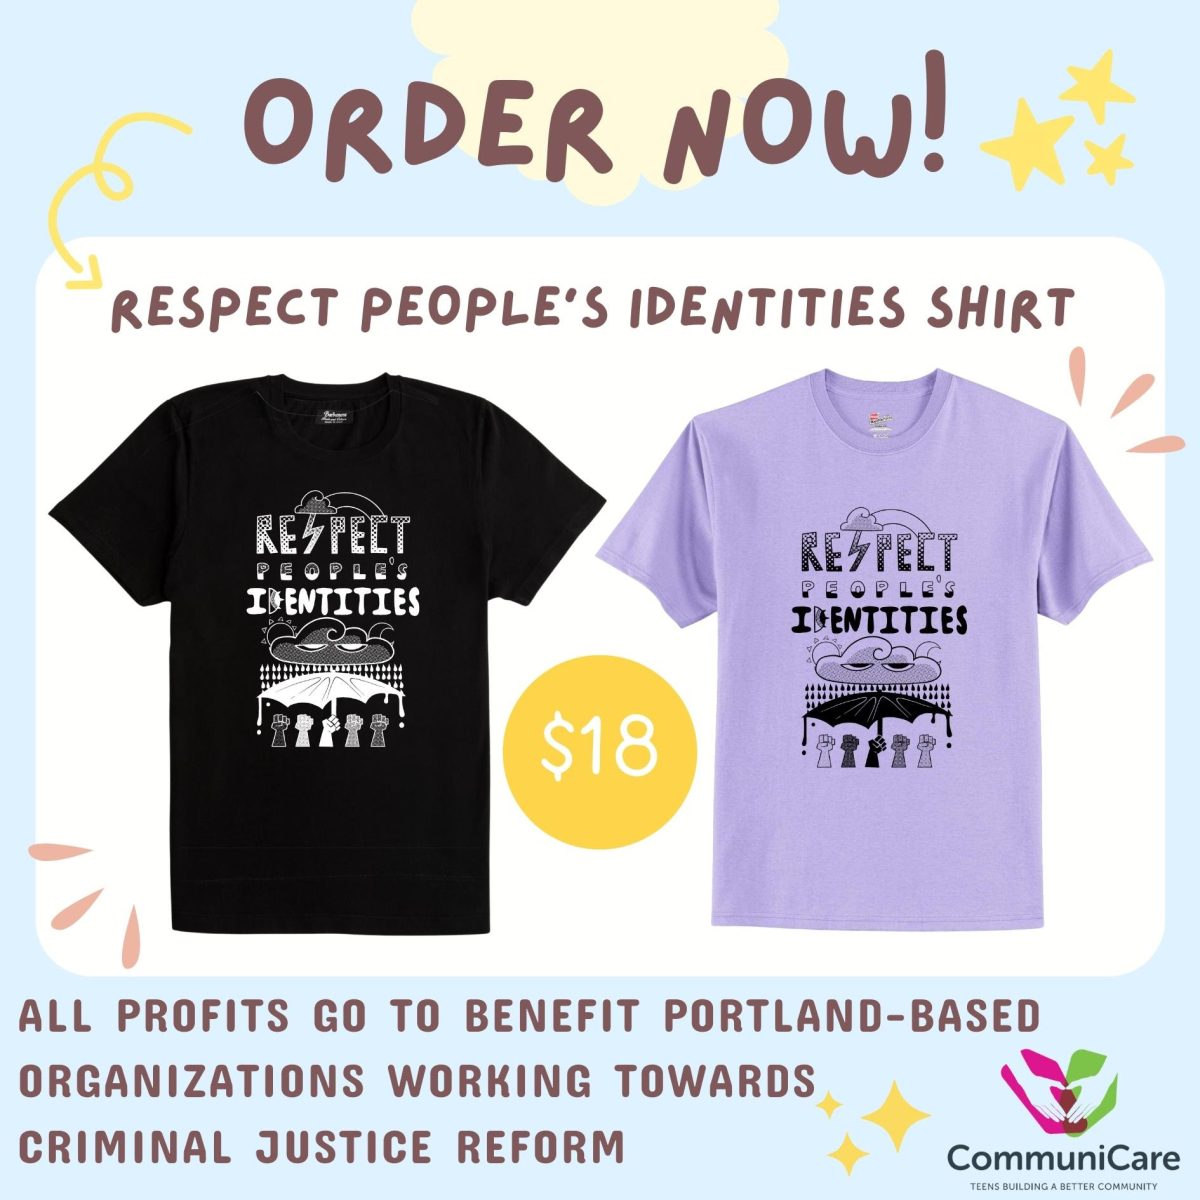 Respect Peoples Identities shirt is on sale. Check out the QR code on this story.